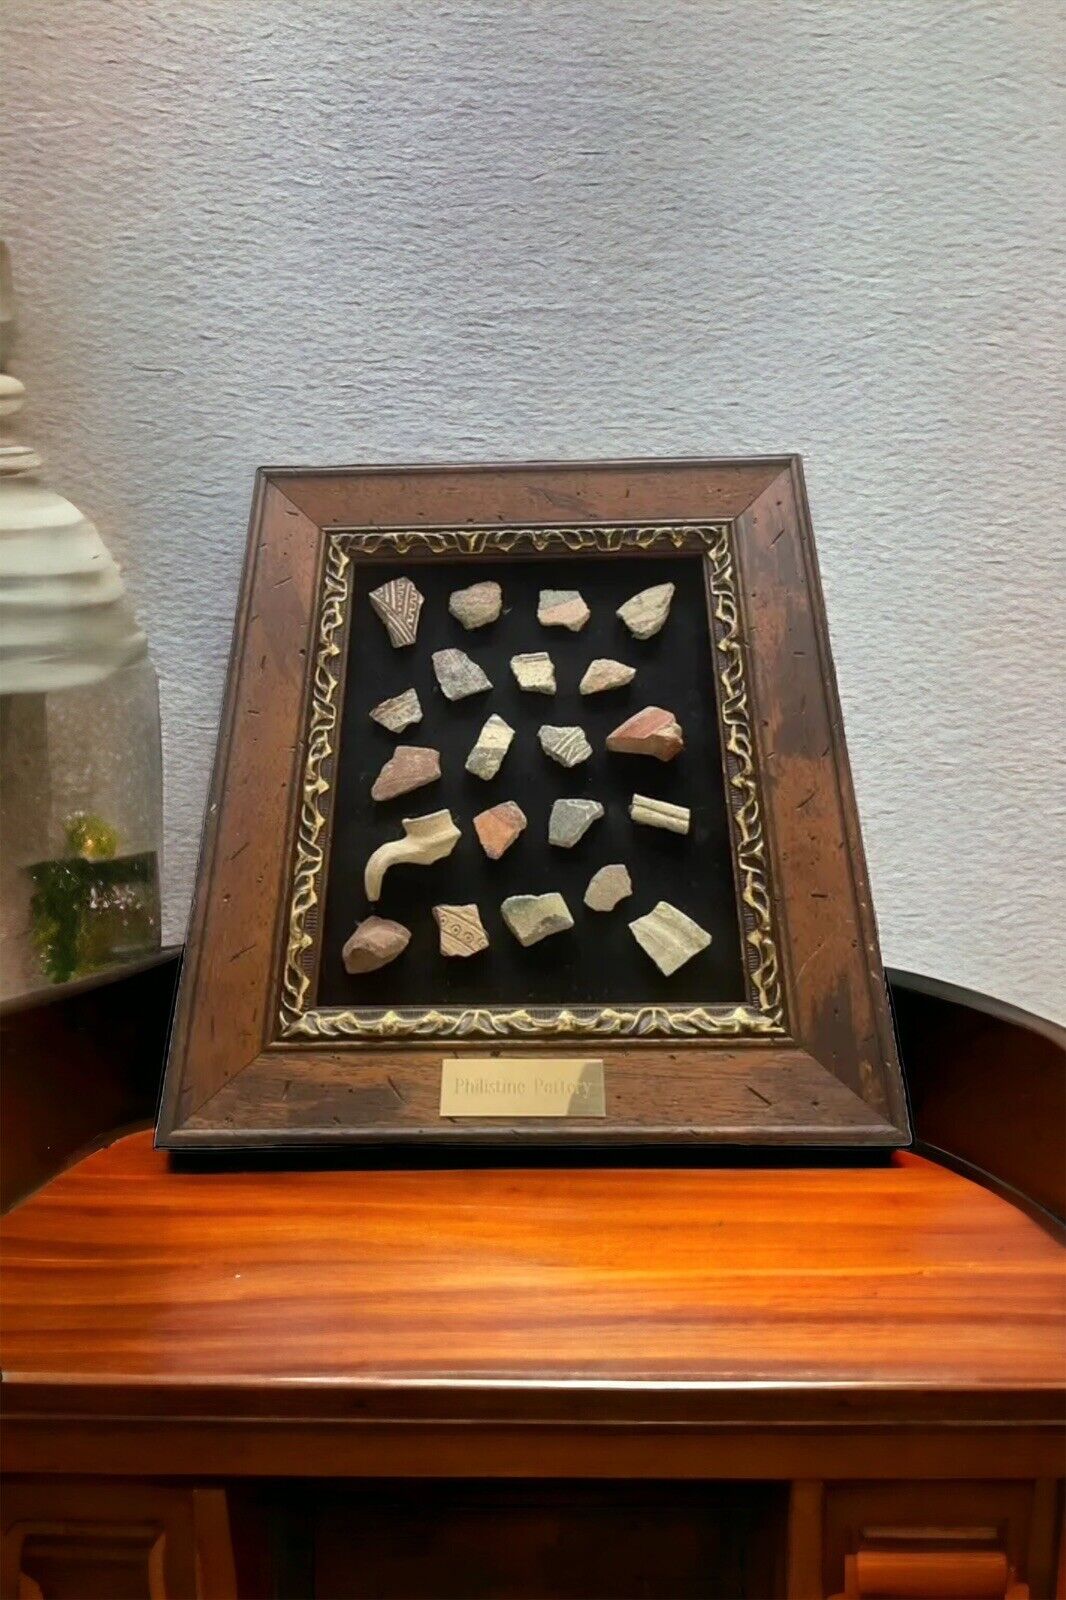 A framed group of Philistine pottery fragments